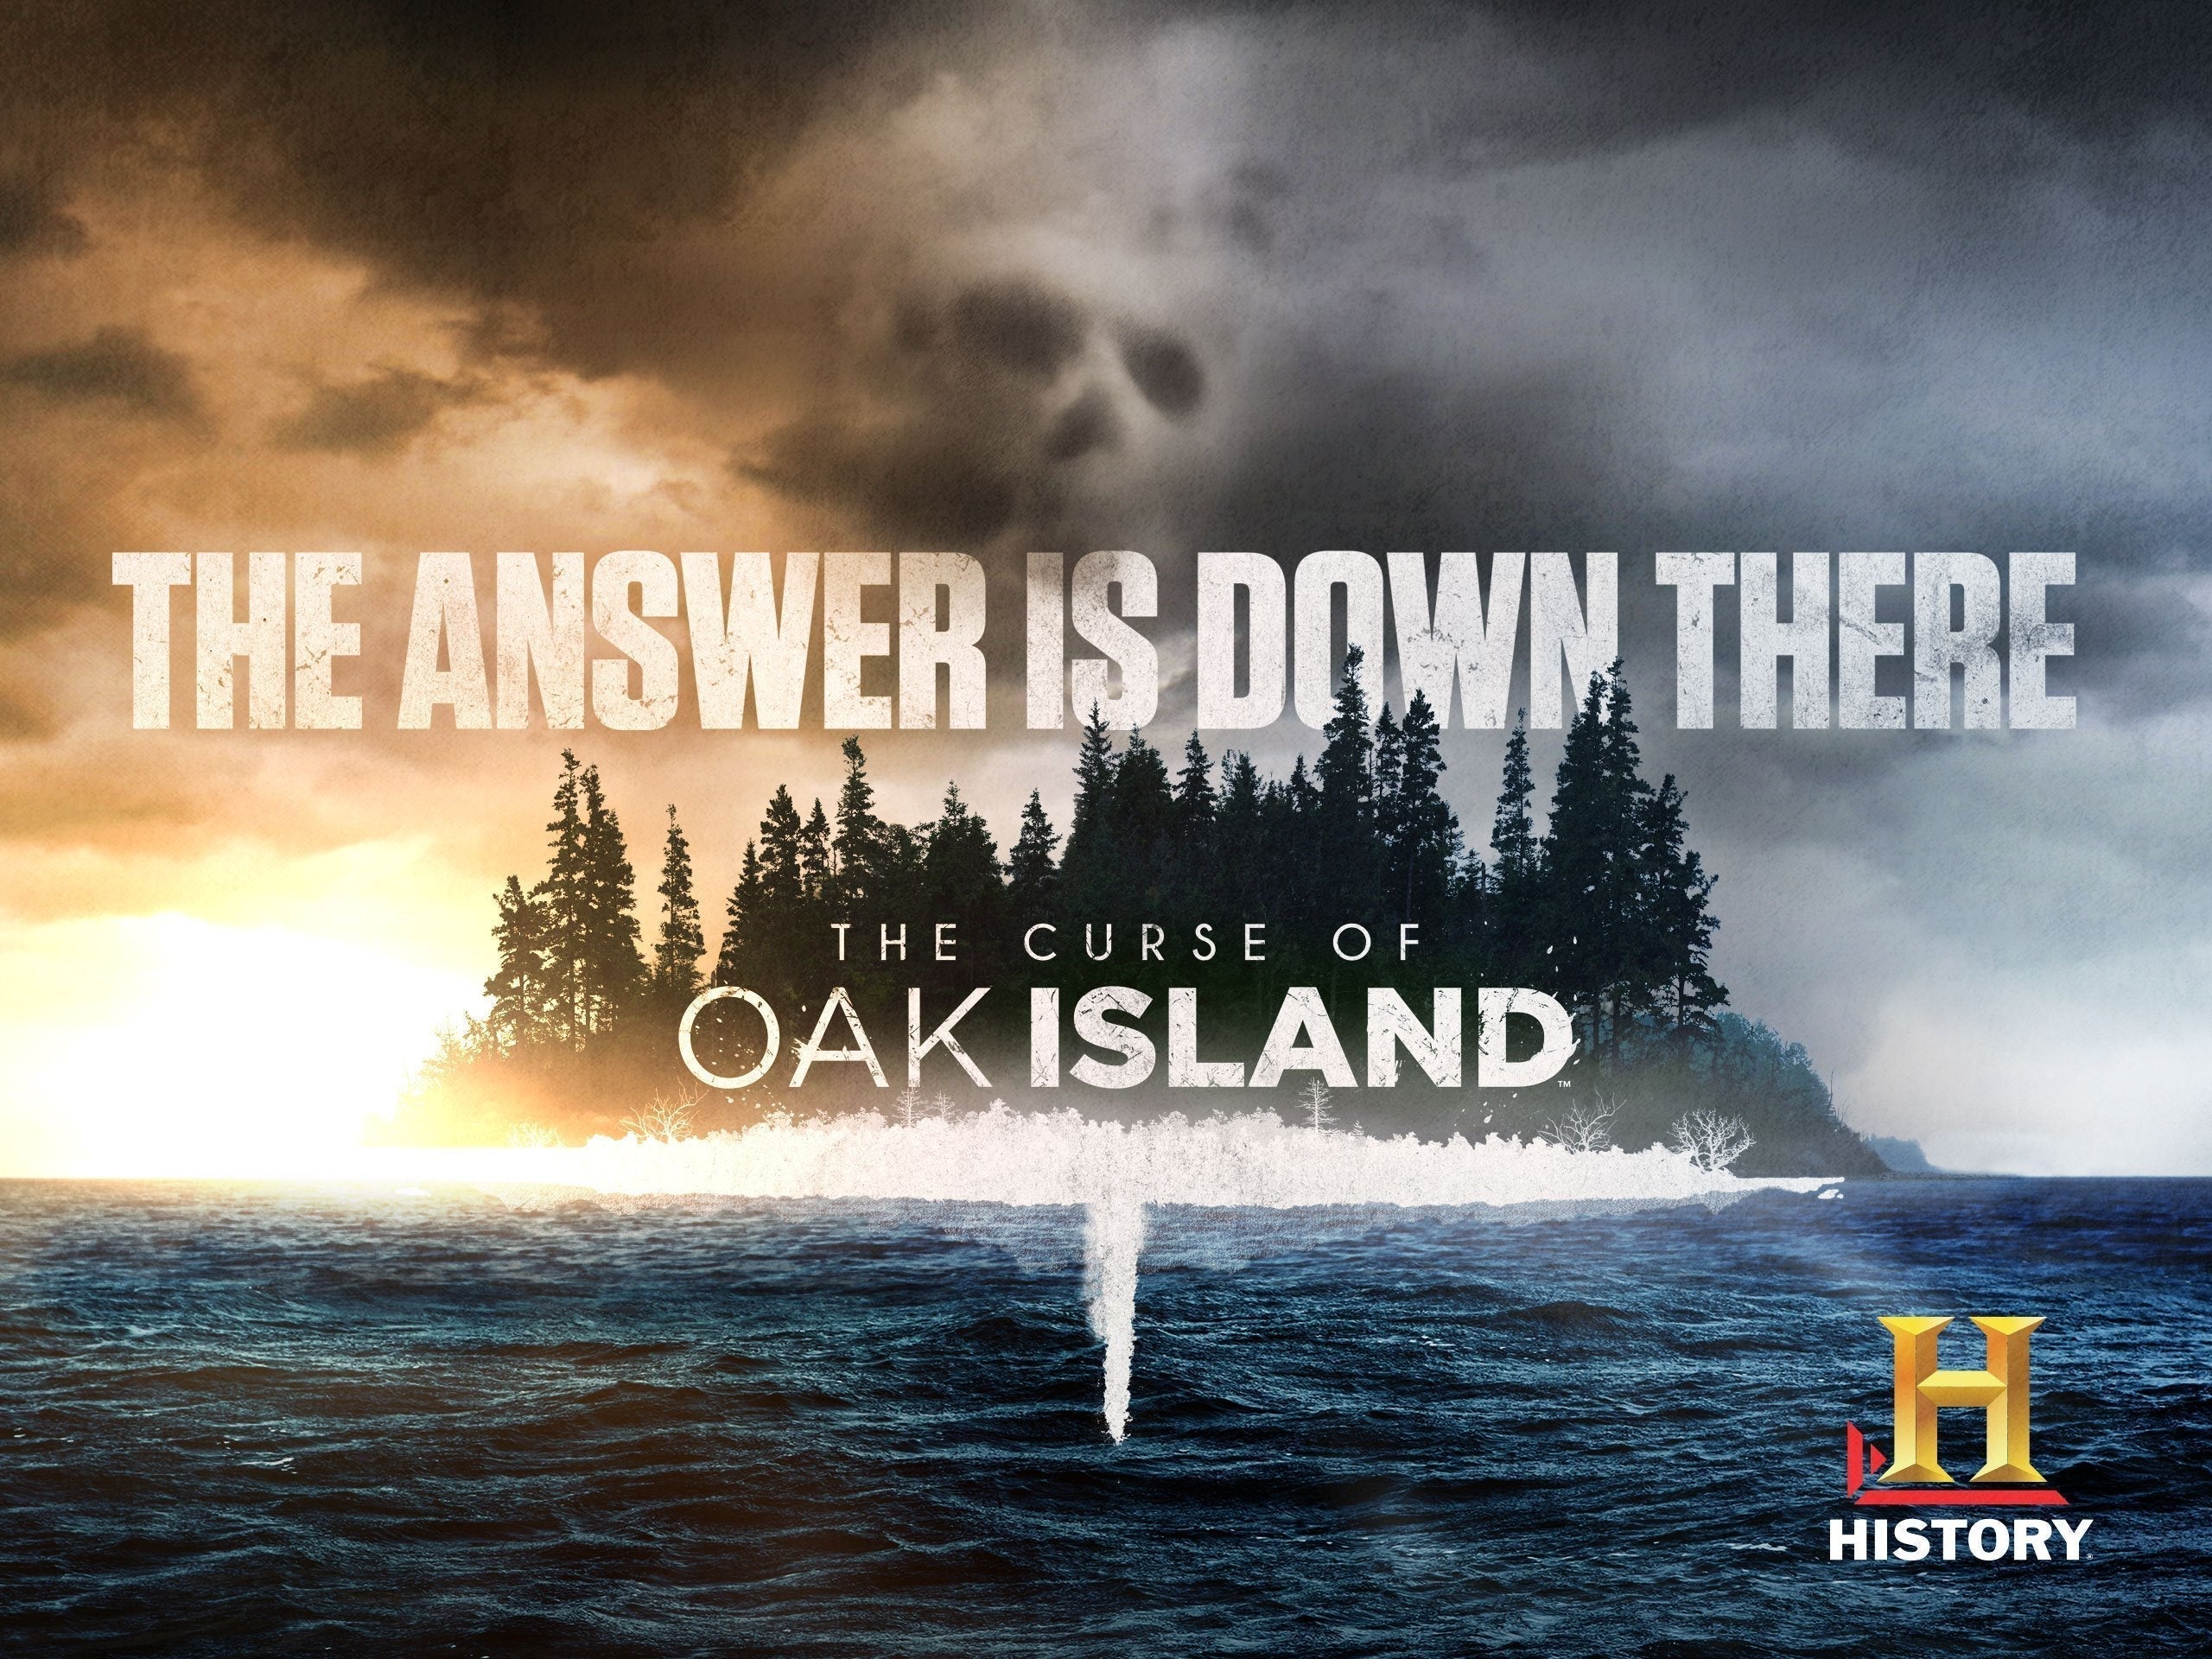 What Metal Detectors Do They Use on The Curse of Oak Island?